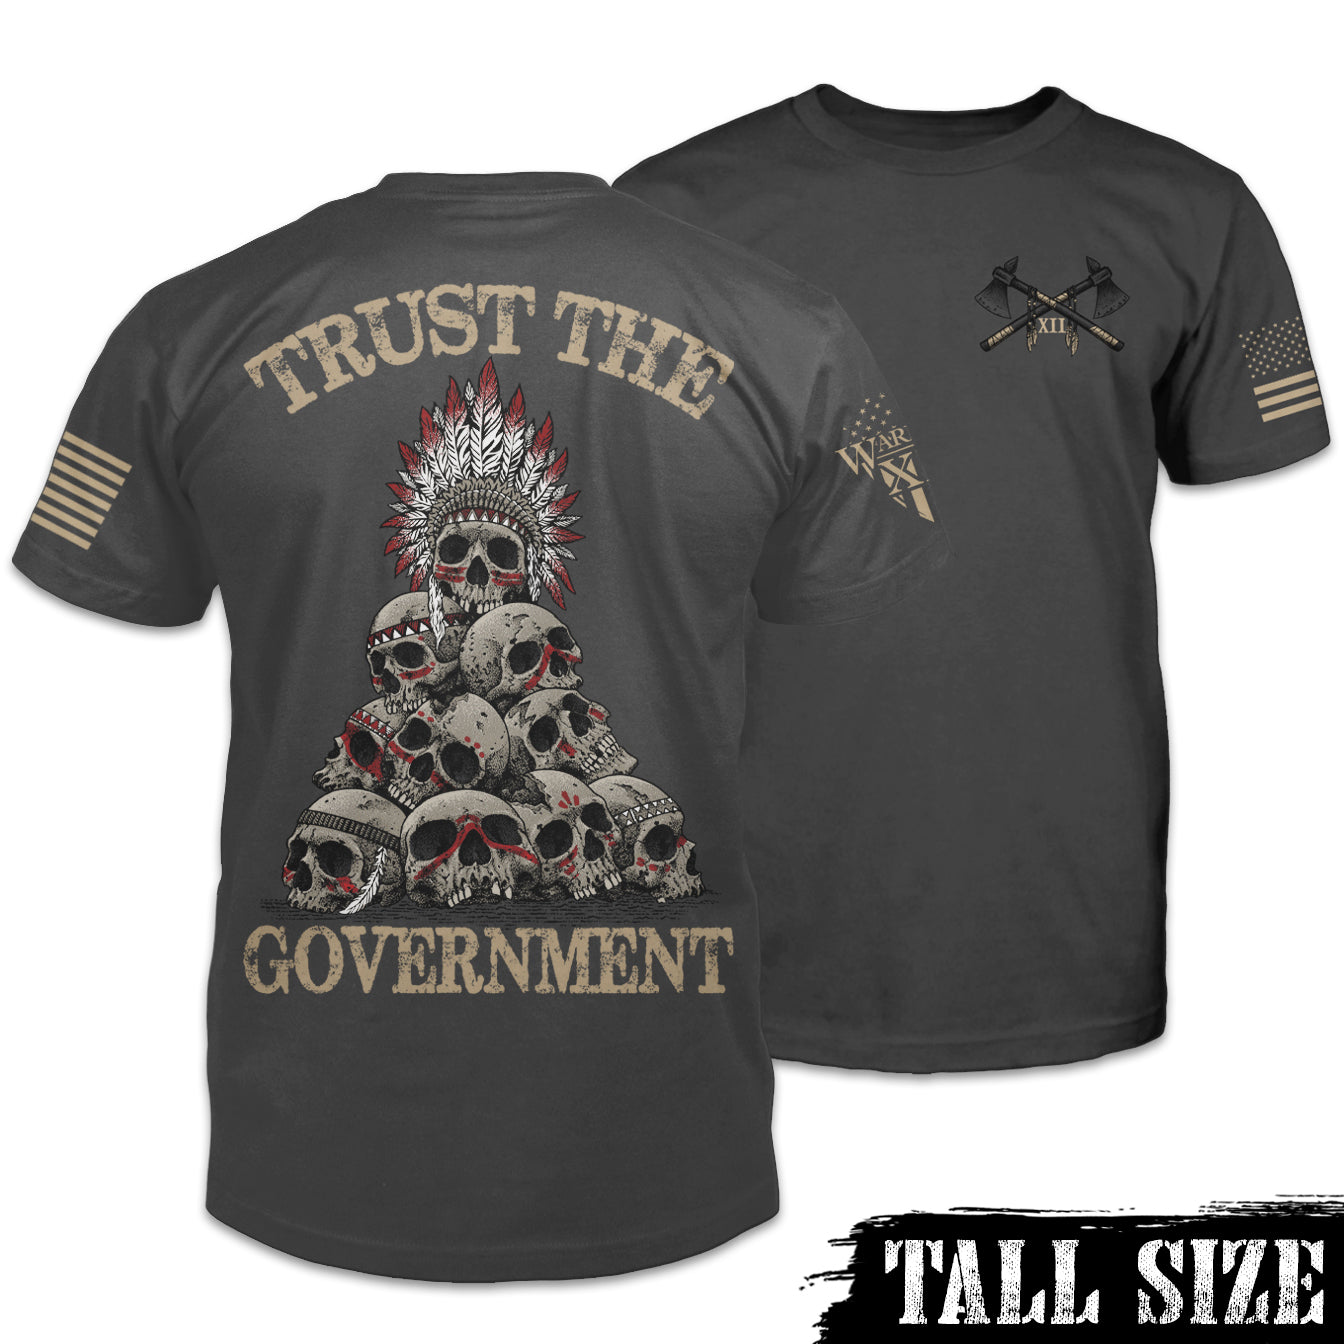 Front and back dark grey tall size shirt with the words "Trust the government" printed on the shirt.